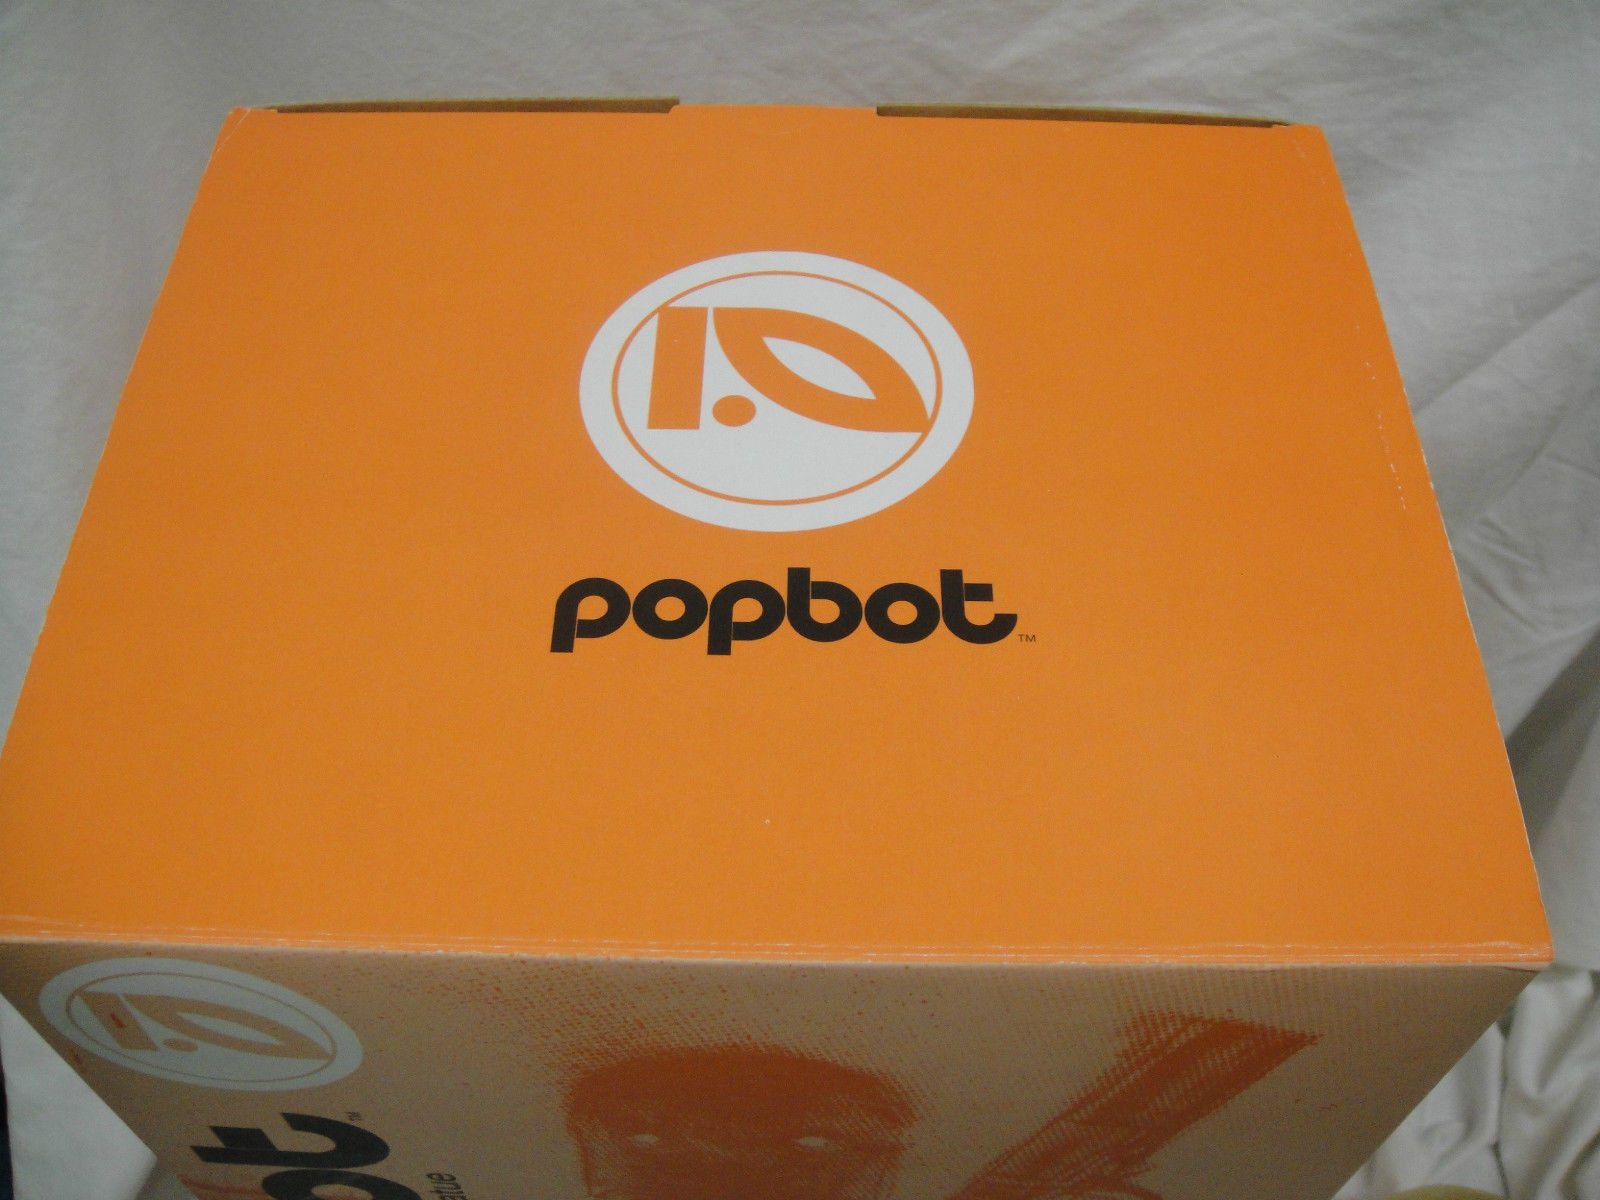 Popbot Polystone Statue from Sideshow